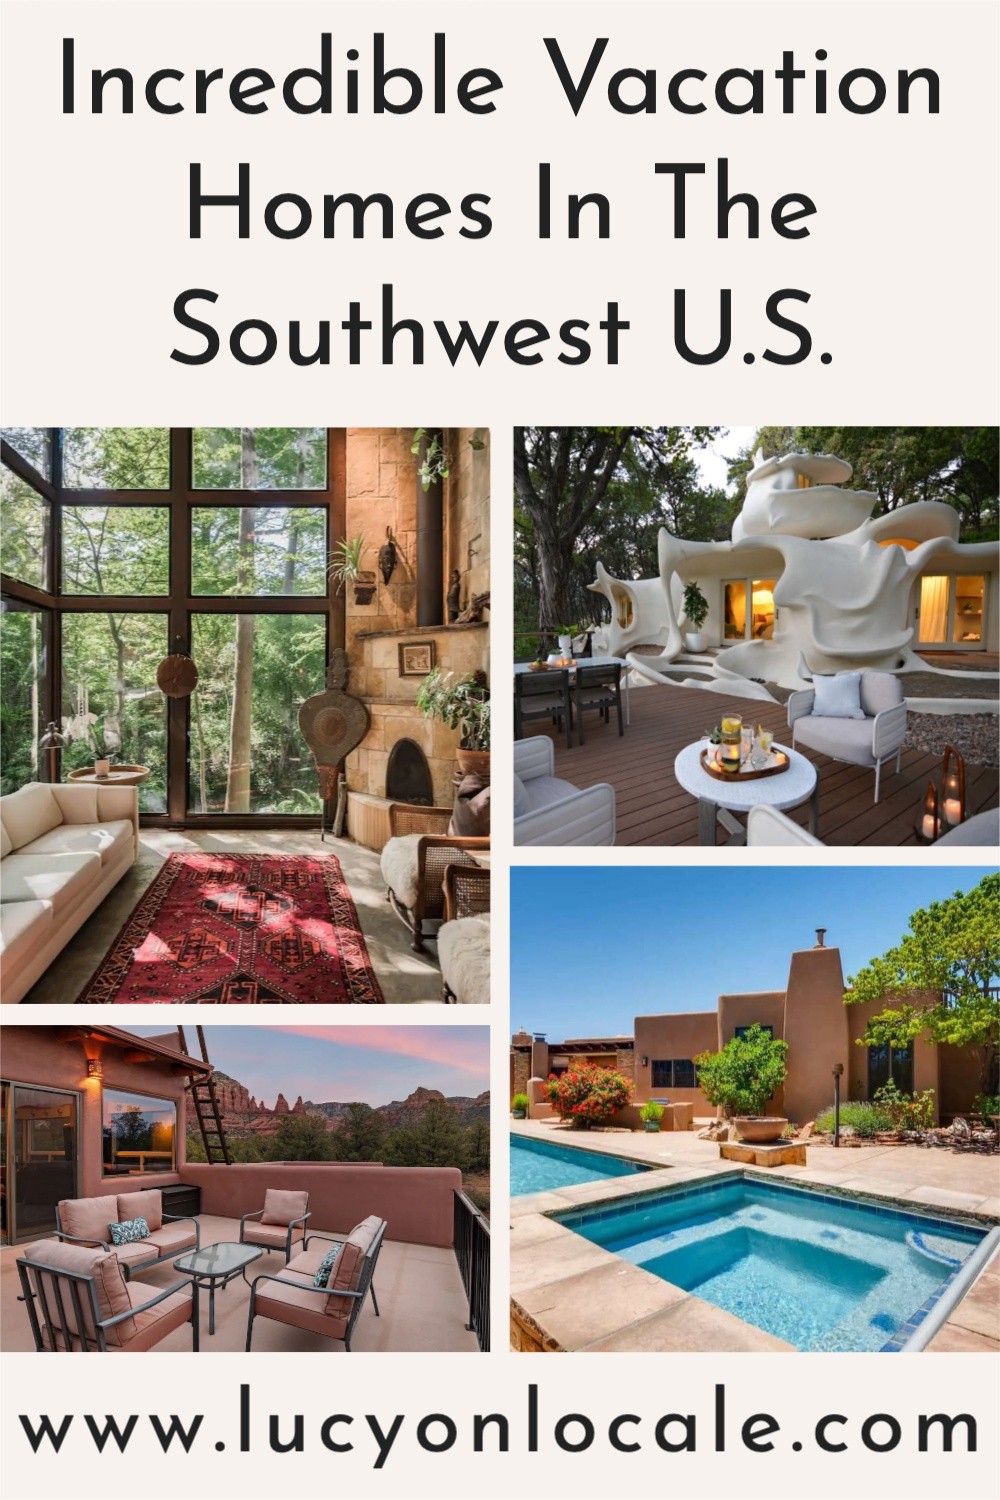 The best vacation homes in the Southwest U.S.